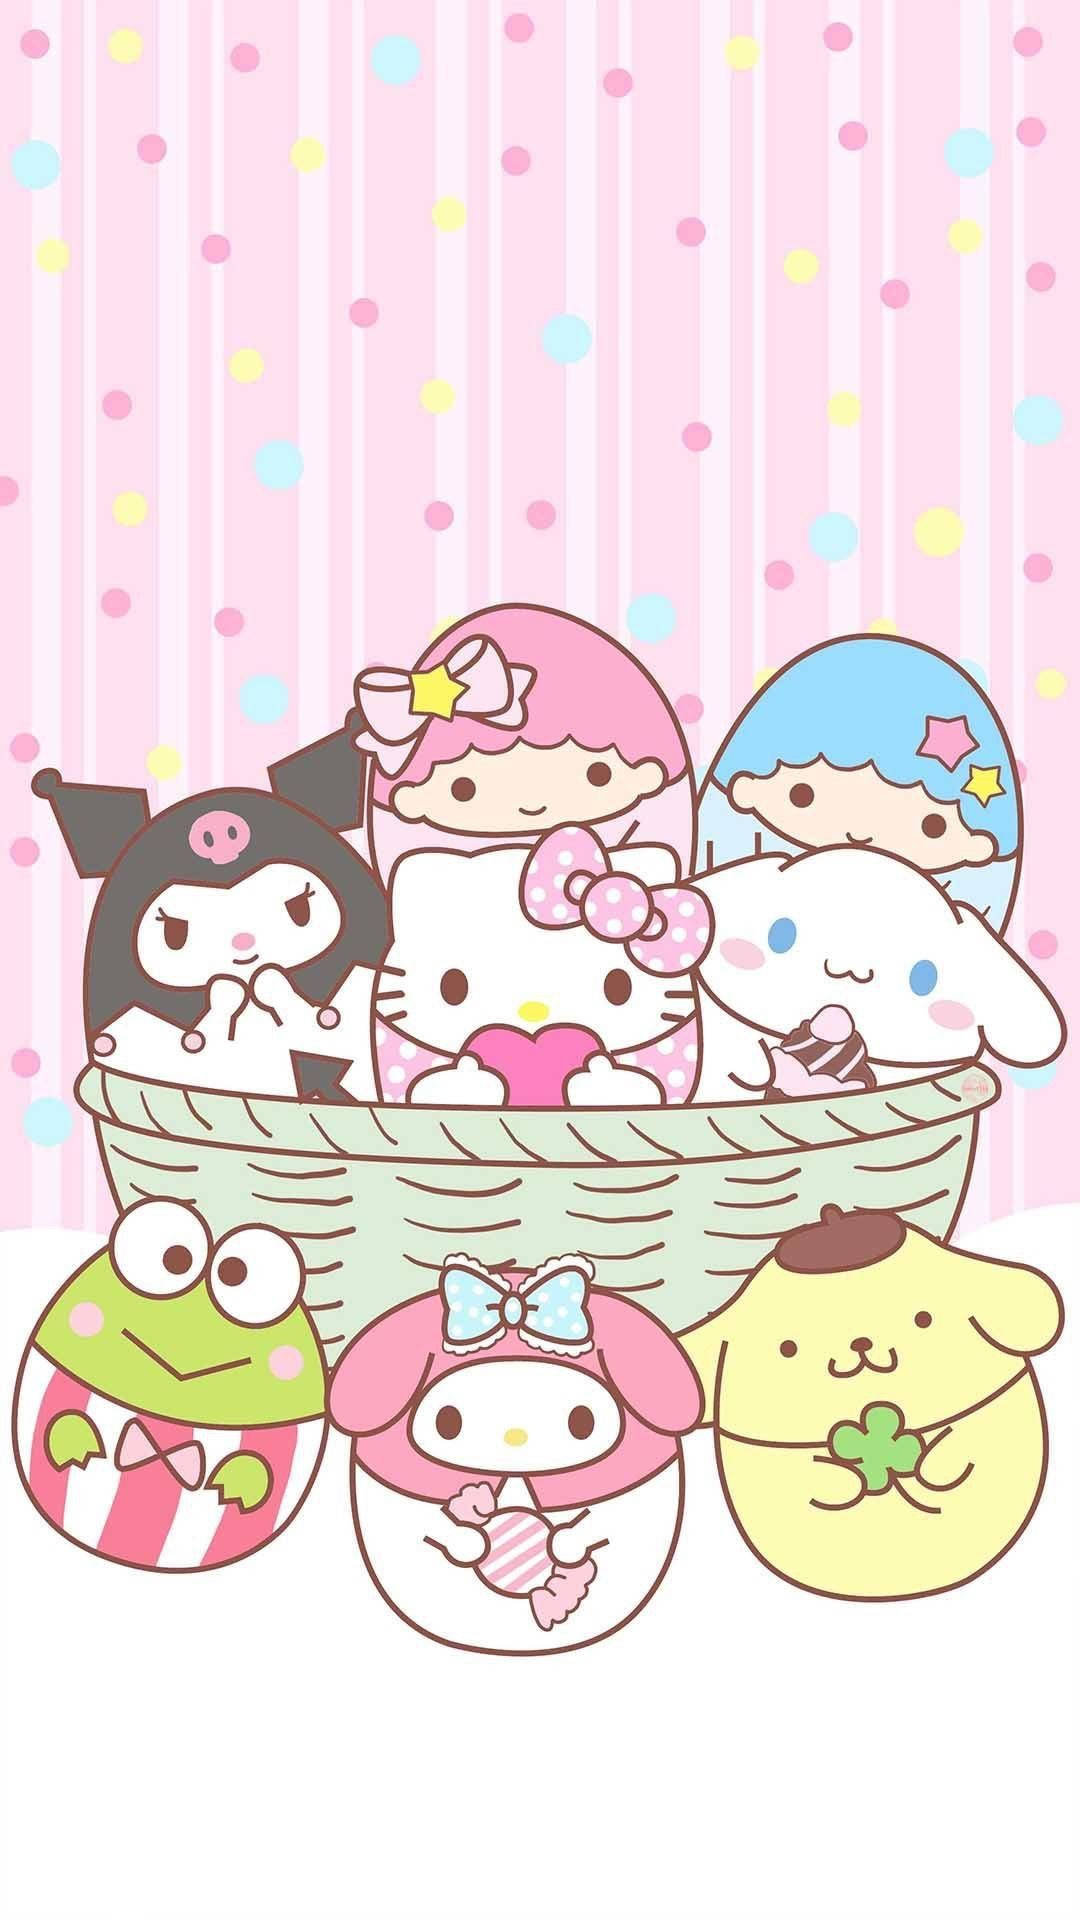 Sanrio Characters In A Basket Background